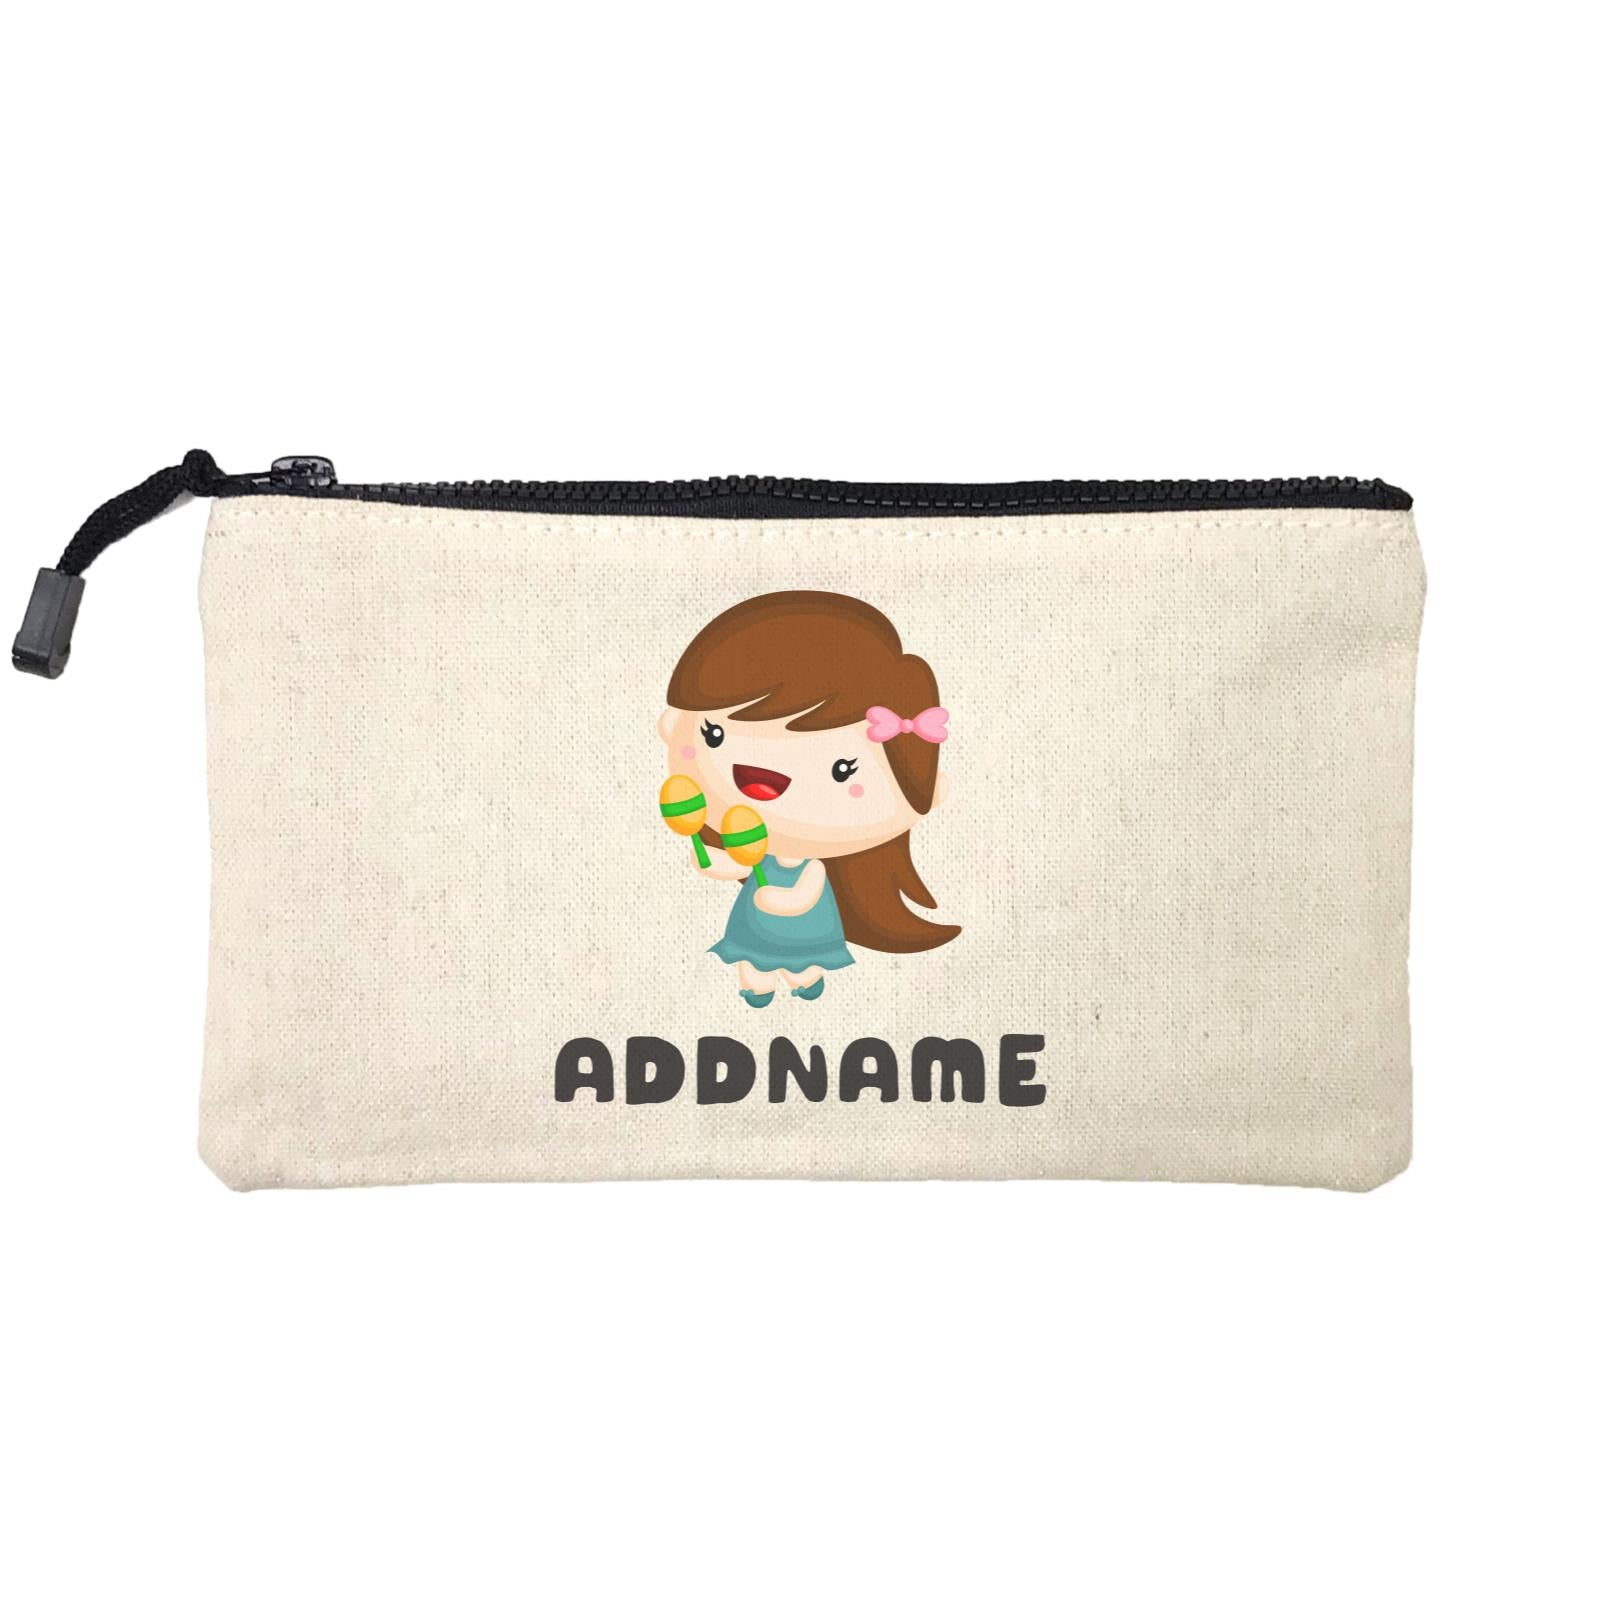 Birthday Music Band Girl Playing Maracas Addname Mini Accessories Stationery Pouch